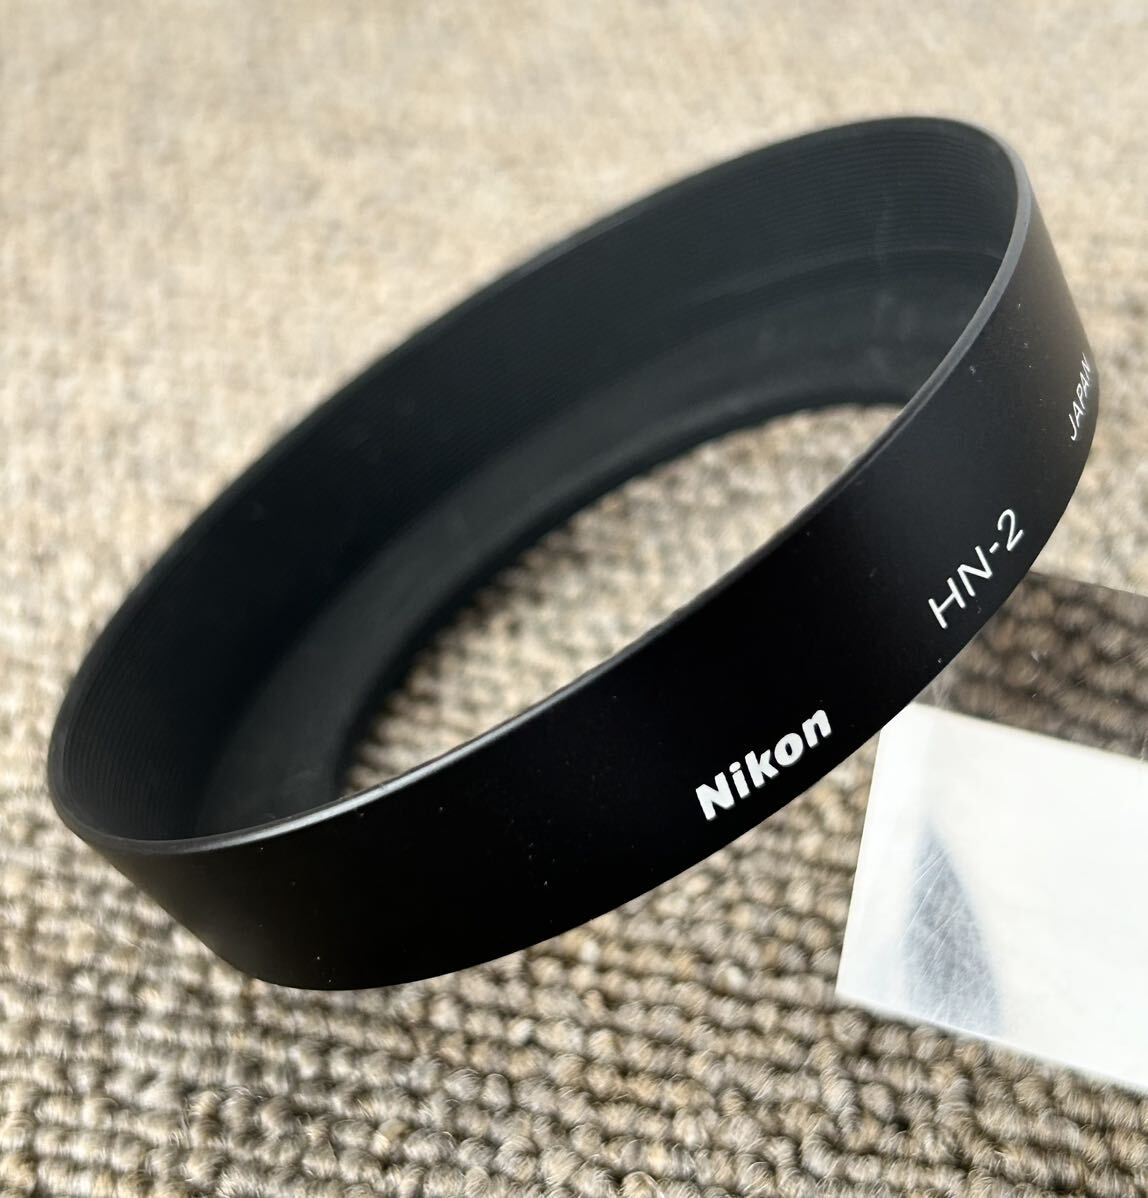 [Nikon HN-2] ニコン純正 メタルレンズフード 52mm ねじ込み式 (AF28mmF2.8 ・35～70mmF3.3～4.5S 等用) [中古良品 a] ☆送料無料☆の画像5